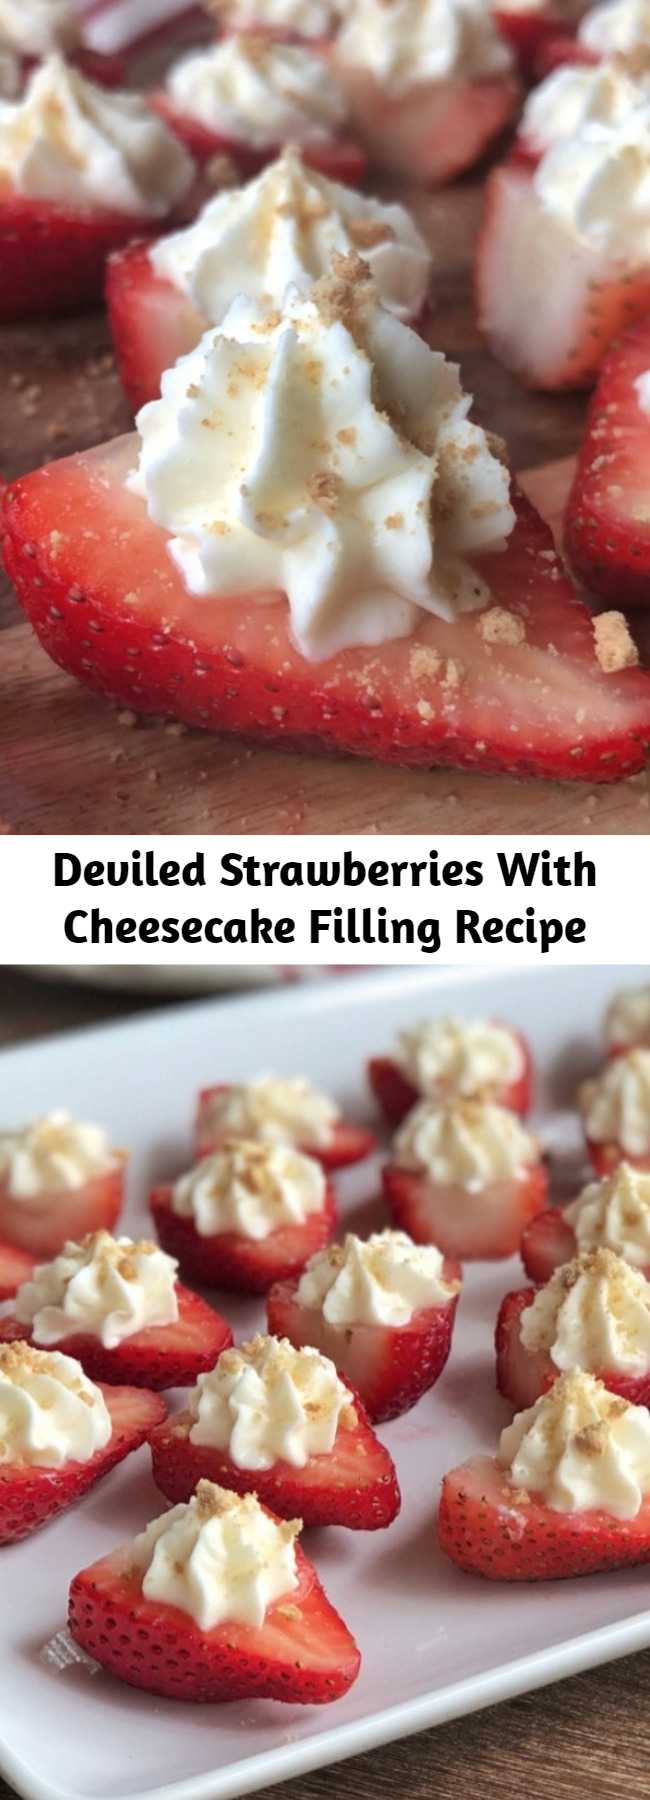 Deviled Strawberries With Cheesecake Filling Recipe - Looking for easy party appetizers for a crowd? This easy finger food idea is always a hit! They taste just like strawberry cheesecake, but in fun bite sized pieces. Quick and make ahead party food! #partyfood #deviledstrawberries